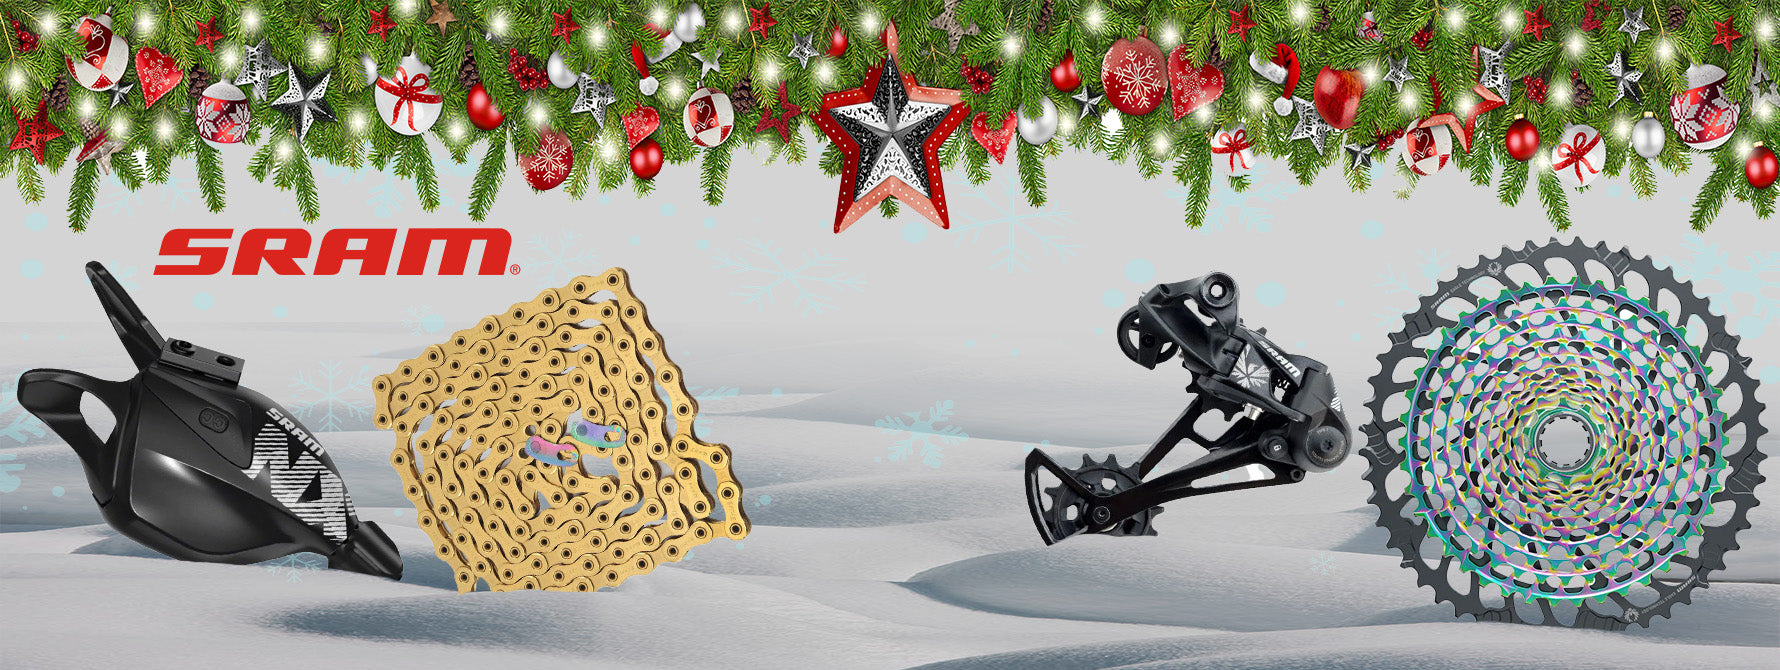 SRAM cycling pars: 20% off SRAM through December 4th. Full collection link